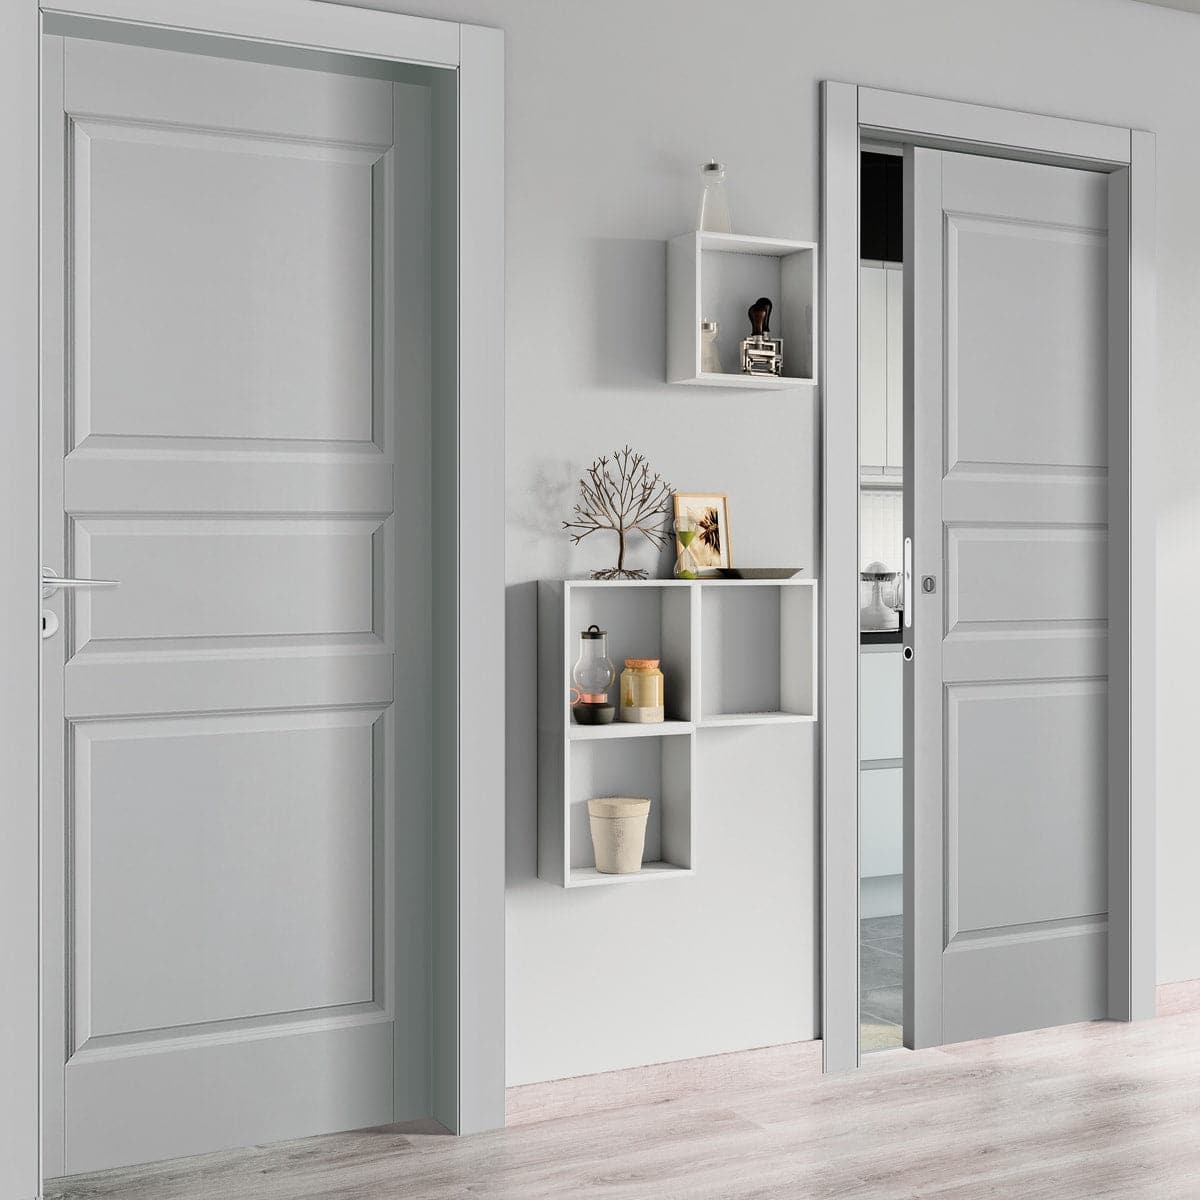 NEW YORK DOOR 70X210 RIGHT GREY LACQUERED - best price from Maltashopper.com BR450002381